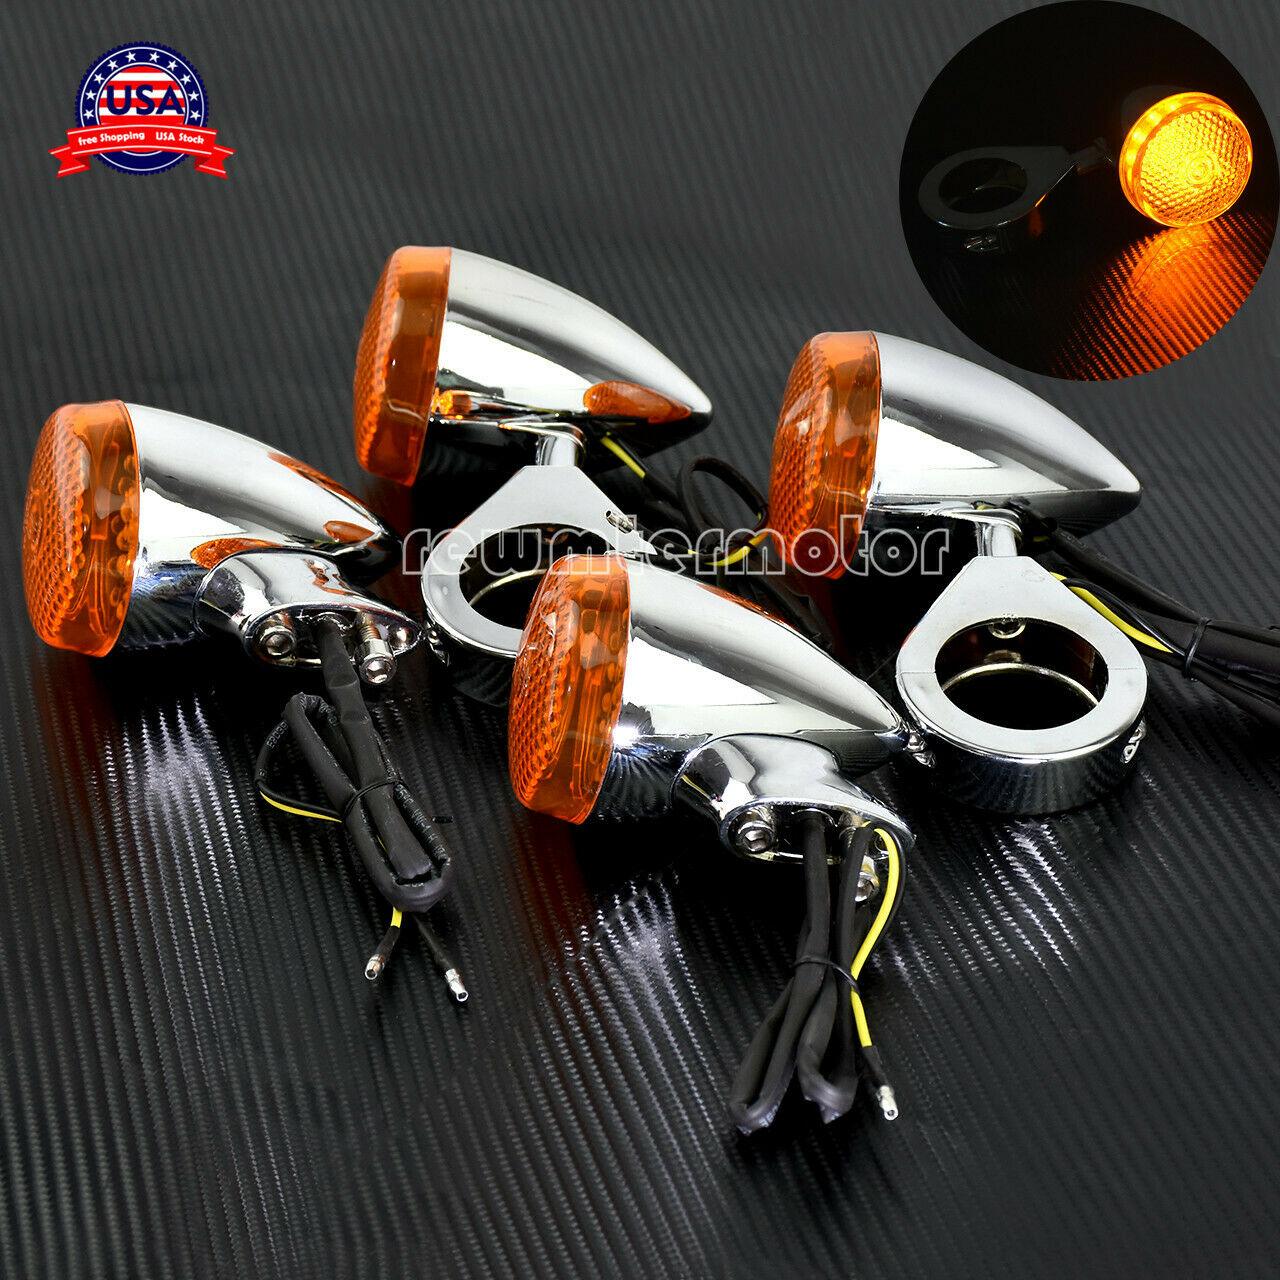 4x Front Rear LED Turn Signal Light w/41mm Fork Fit For Harley Sportster Yamaha - Moto Life Products